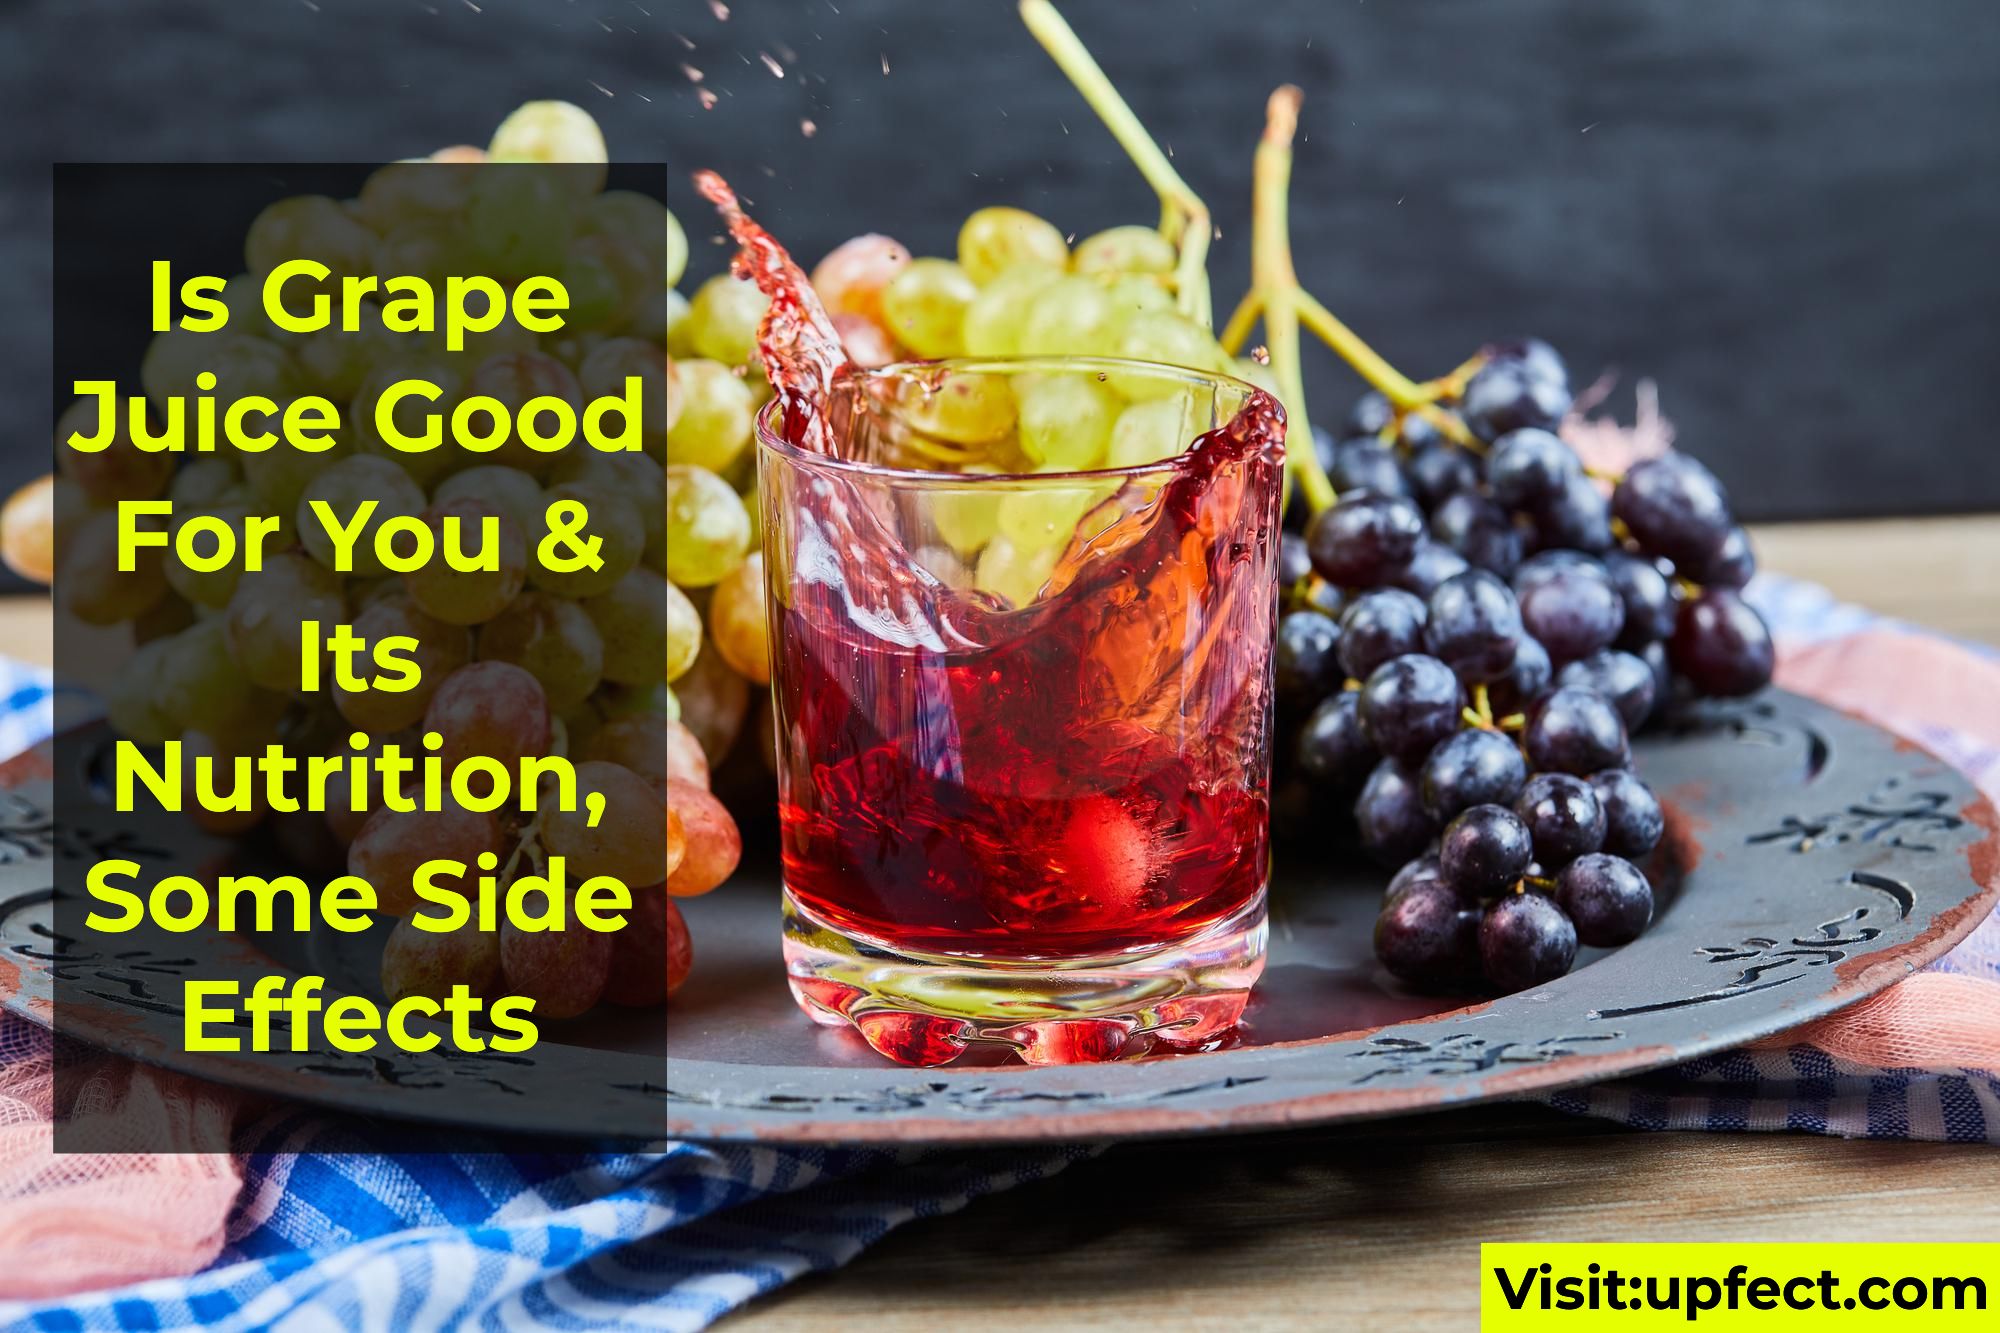 is Grape Juice Good For You